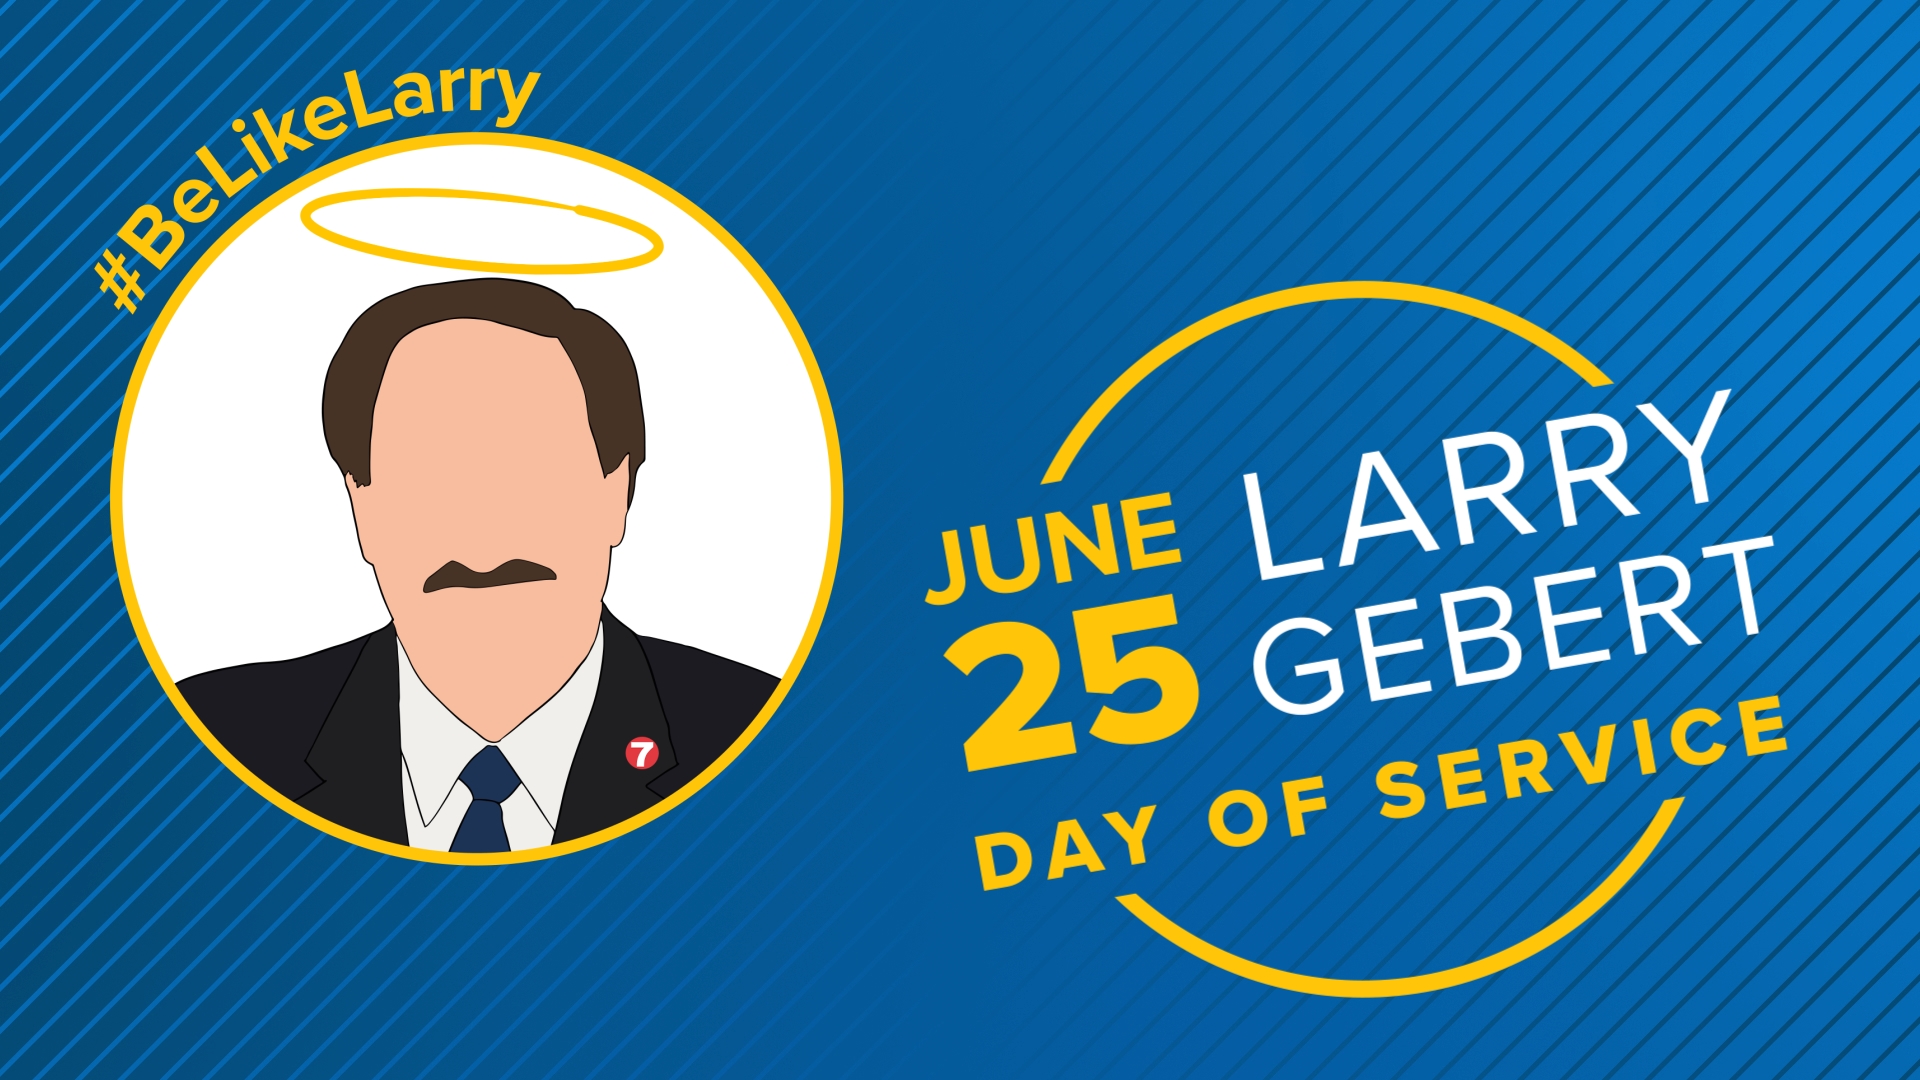 #BeLikeLarry: Ideas for the June 25 Day of Service in honor of Larry Gebert